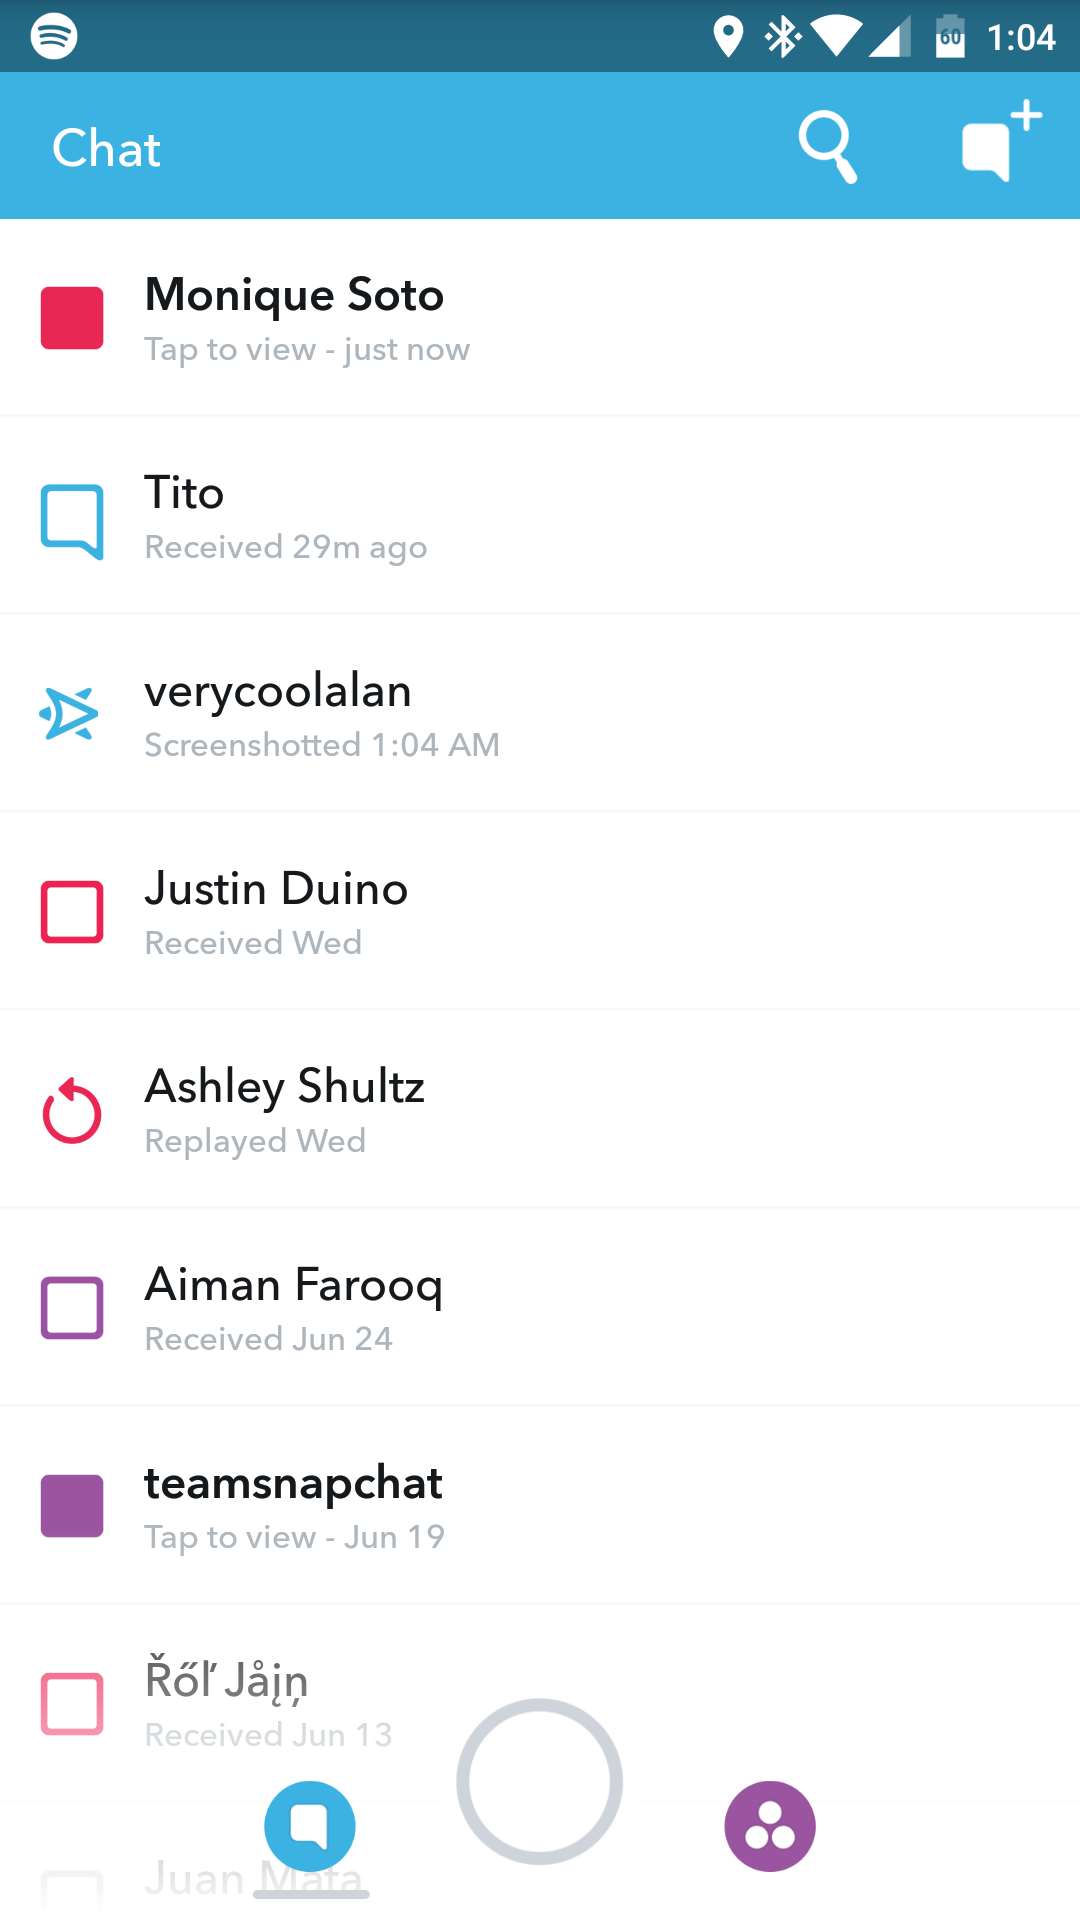 Does Snapchat Send Typing Notification When You Open Chat